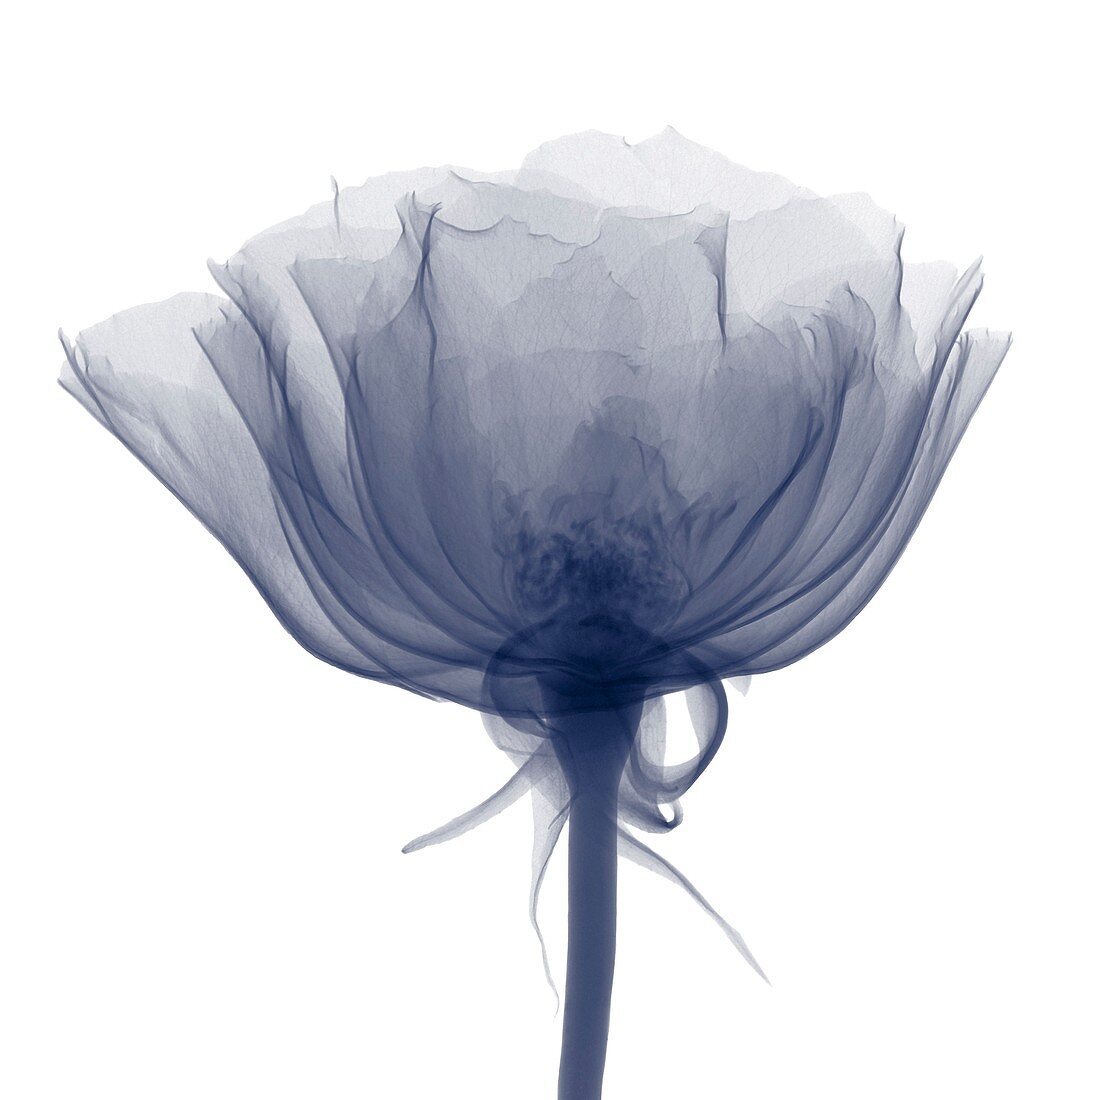 Rose (Rosa sp.), X-ray